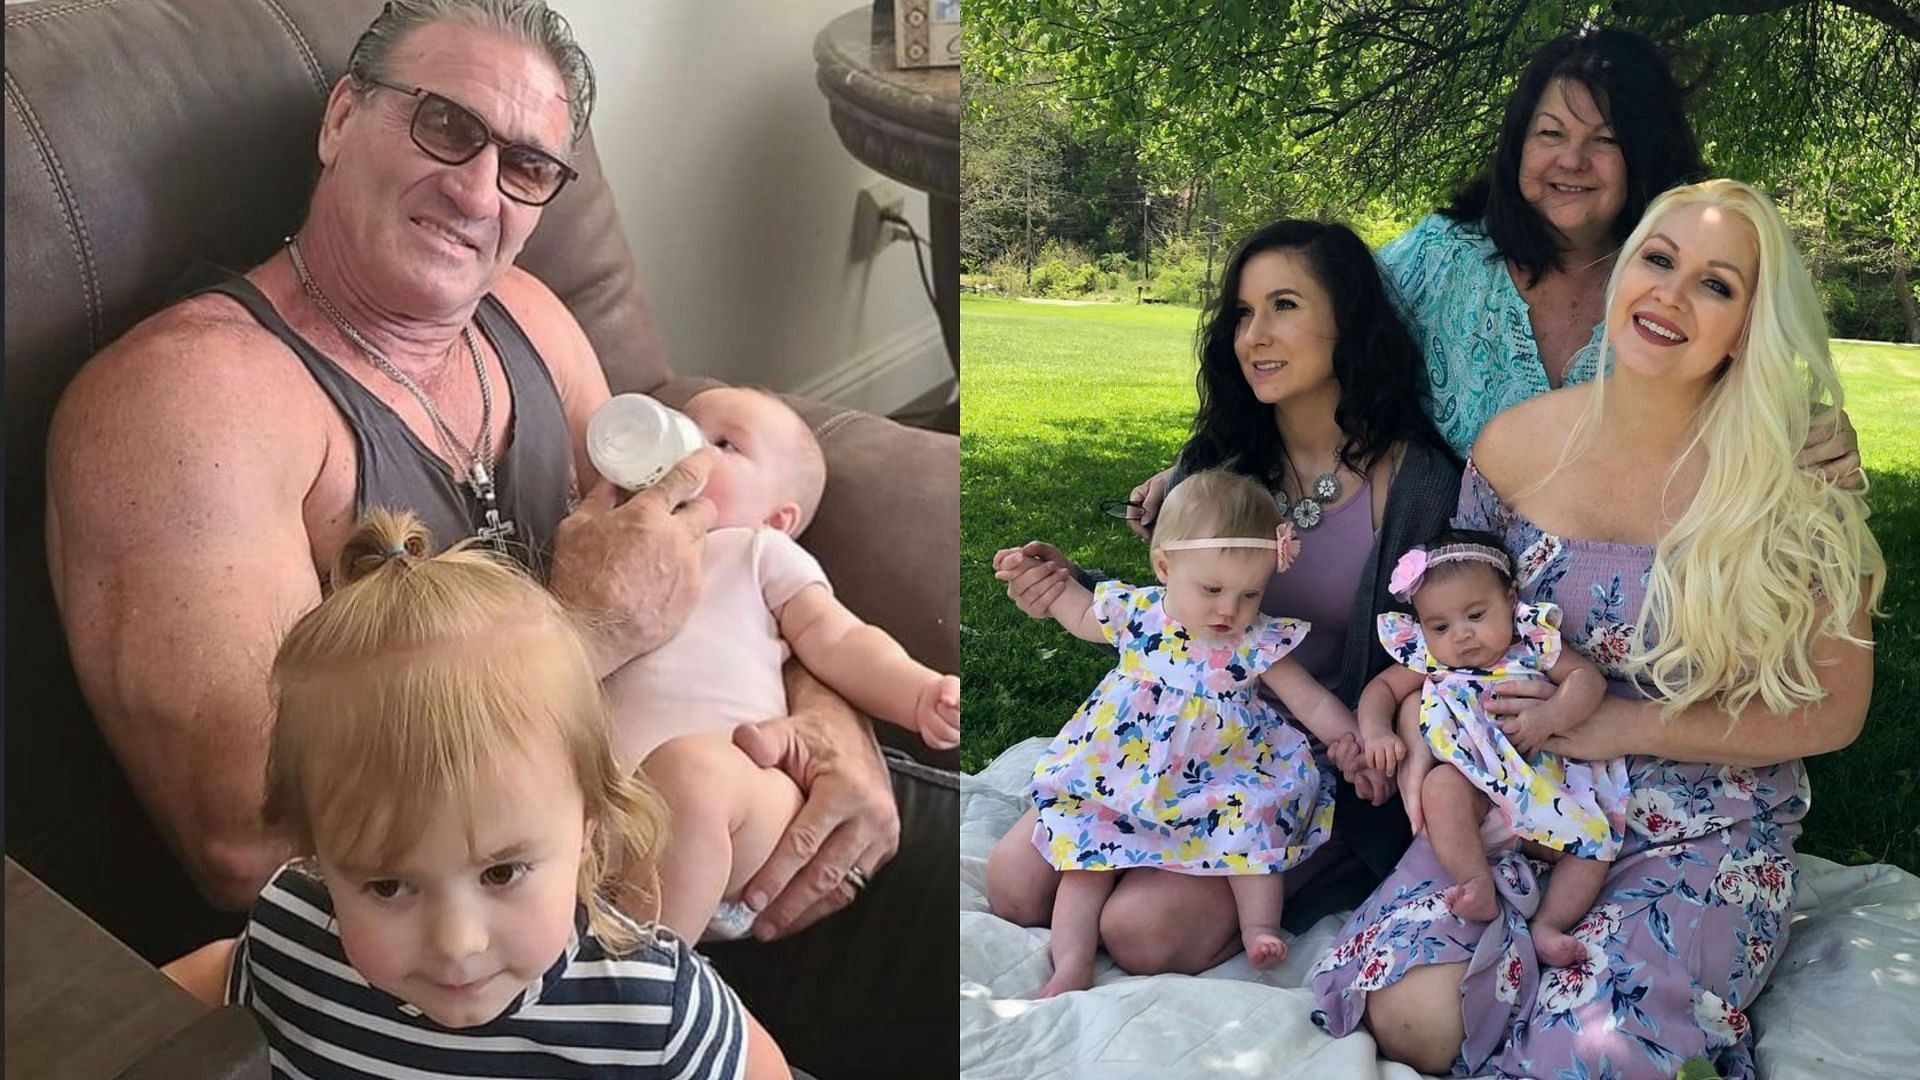 Ken Shamrock with his grandchildren (left) and Jillian Hall with her family (right)